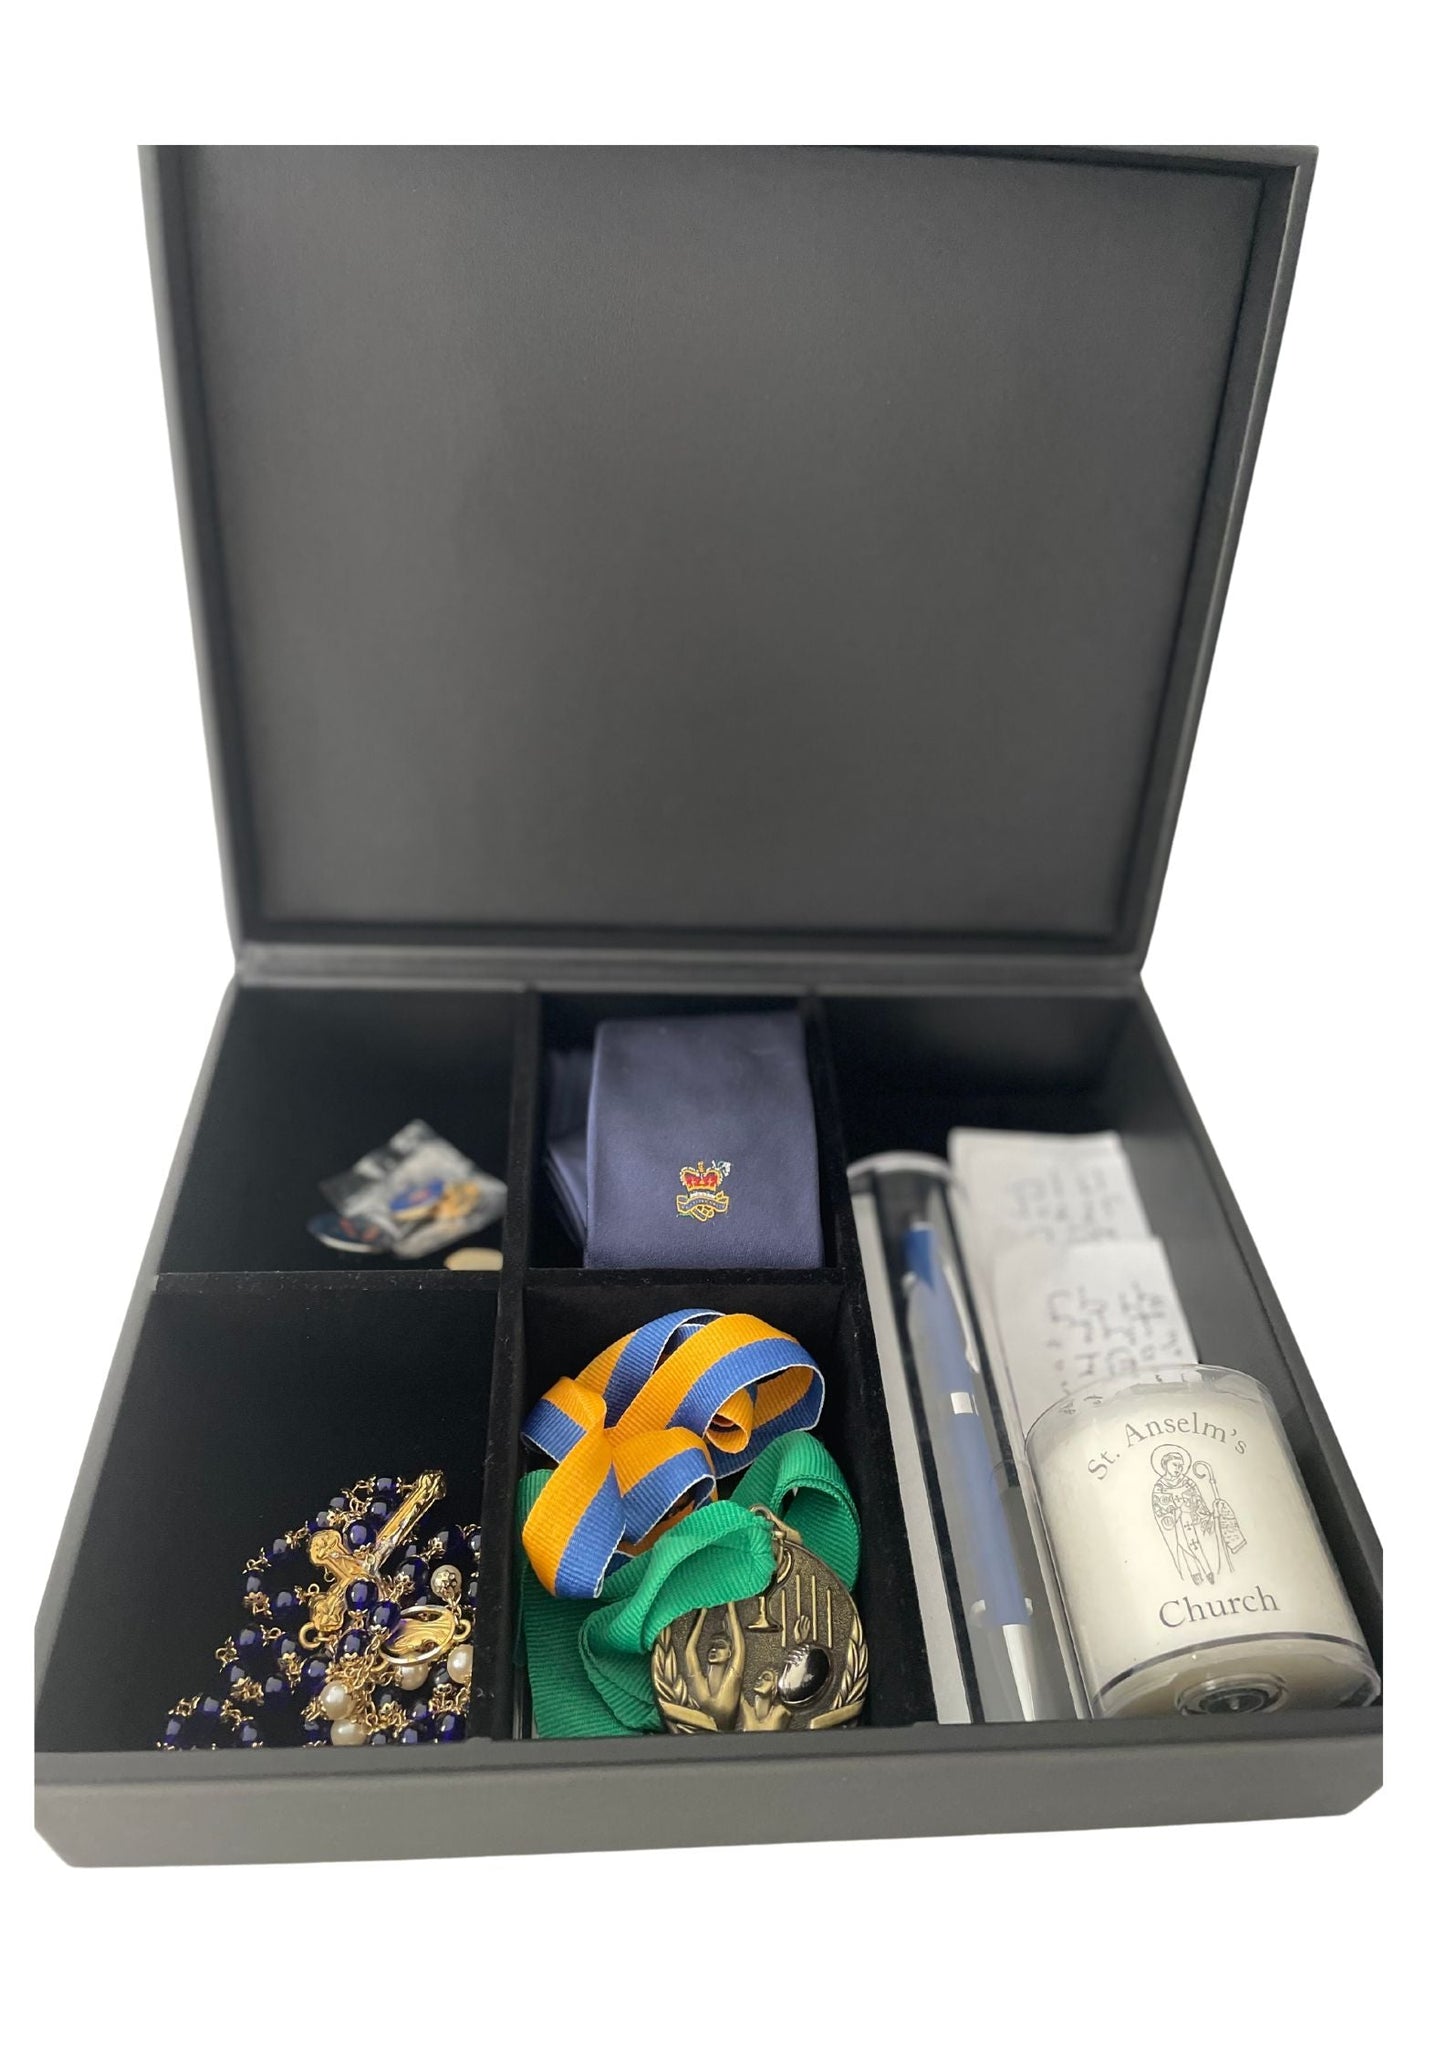 Created for students to fill with small treasures and keepsakes from their school years including medals, ribbons, school tie, special items from their graduation and other special school occasions. 